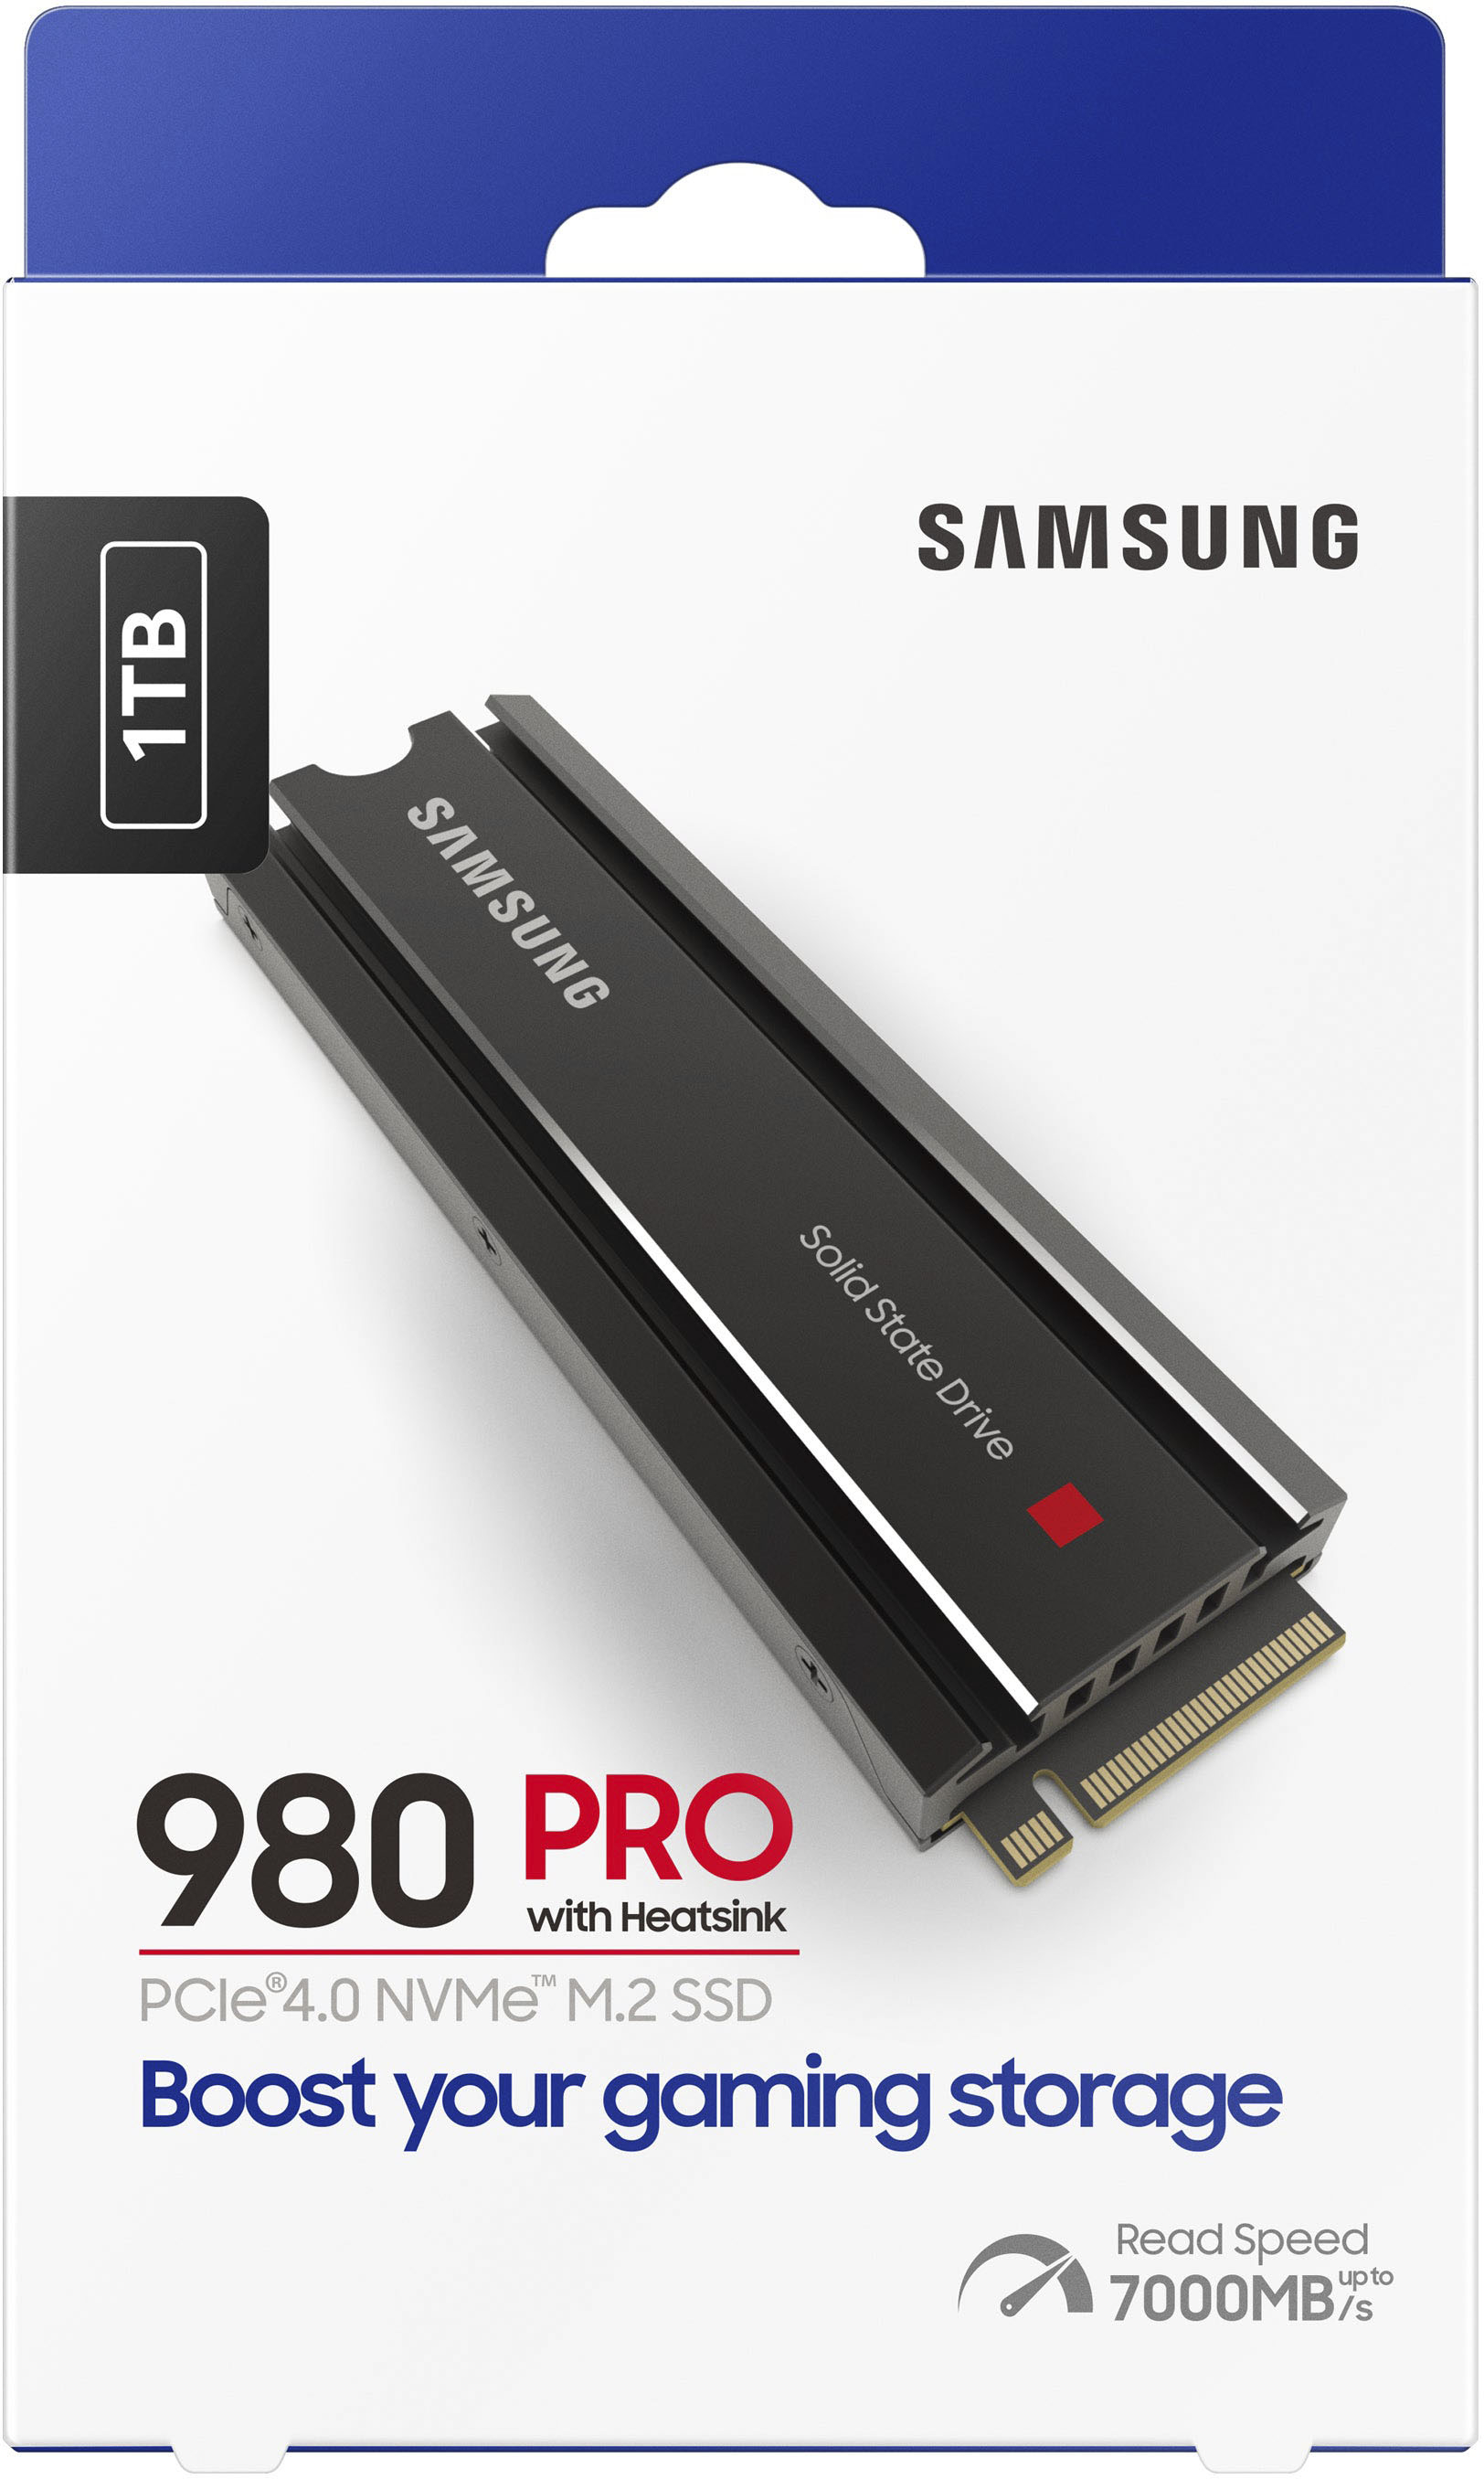 Samsung 980 PRO 1TB PCIe 4.0 NVMe M.2 Internal V-NAND Solid State Drive with  Heatsink PlayStation 5 Compatible